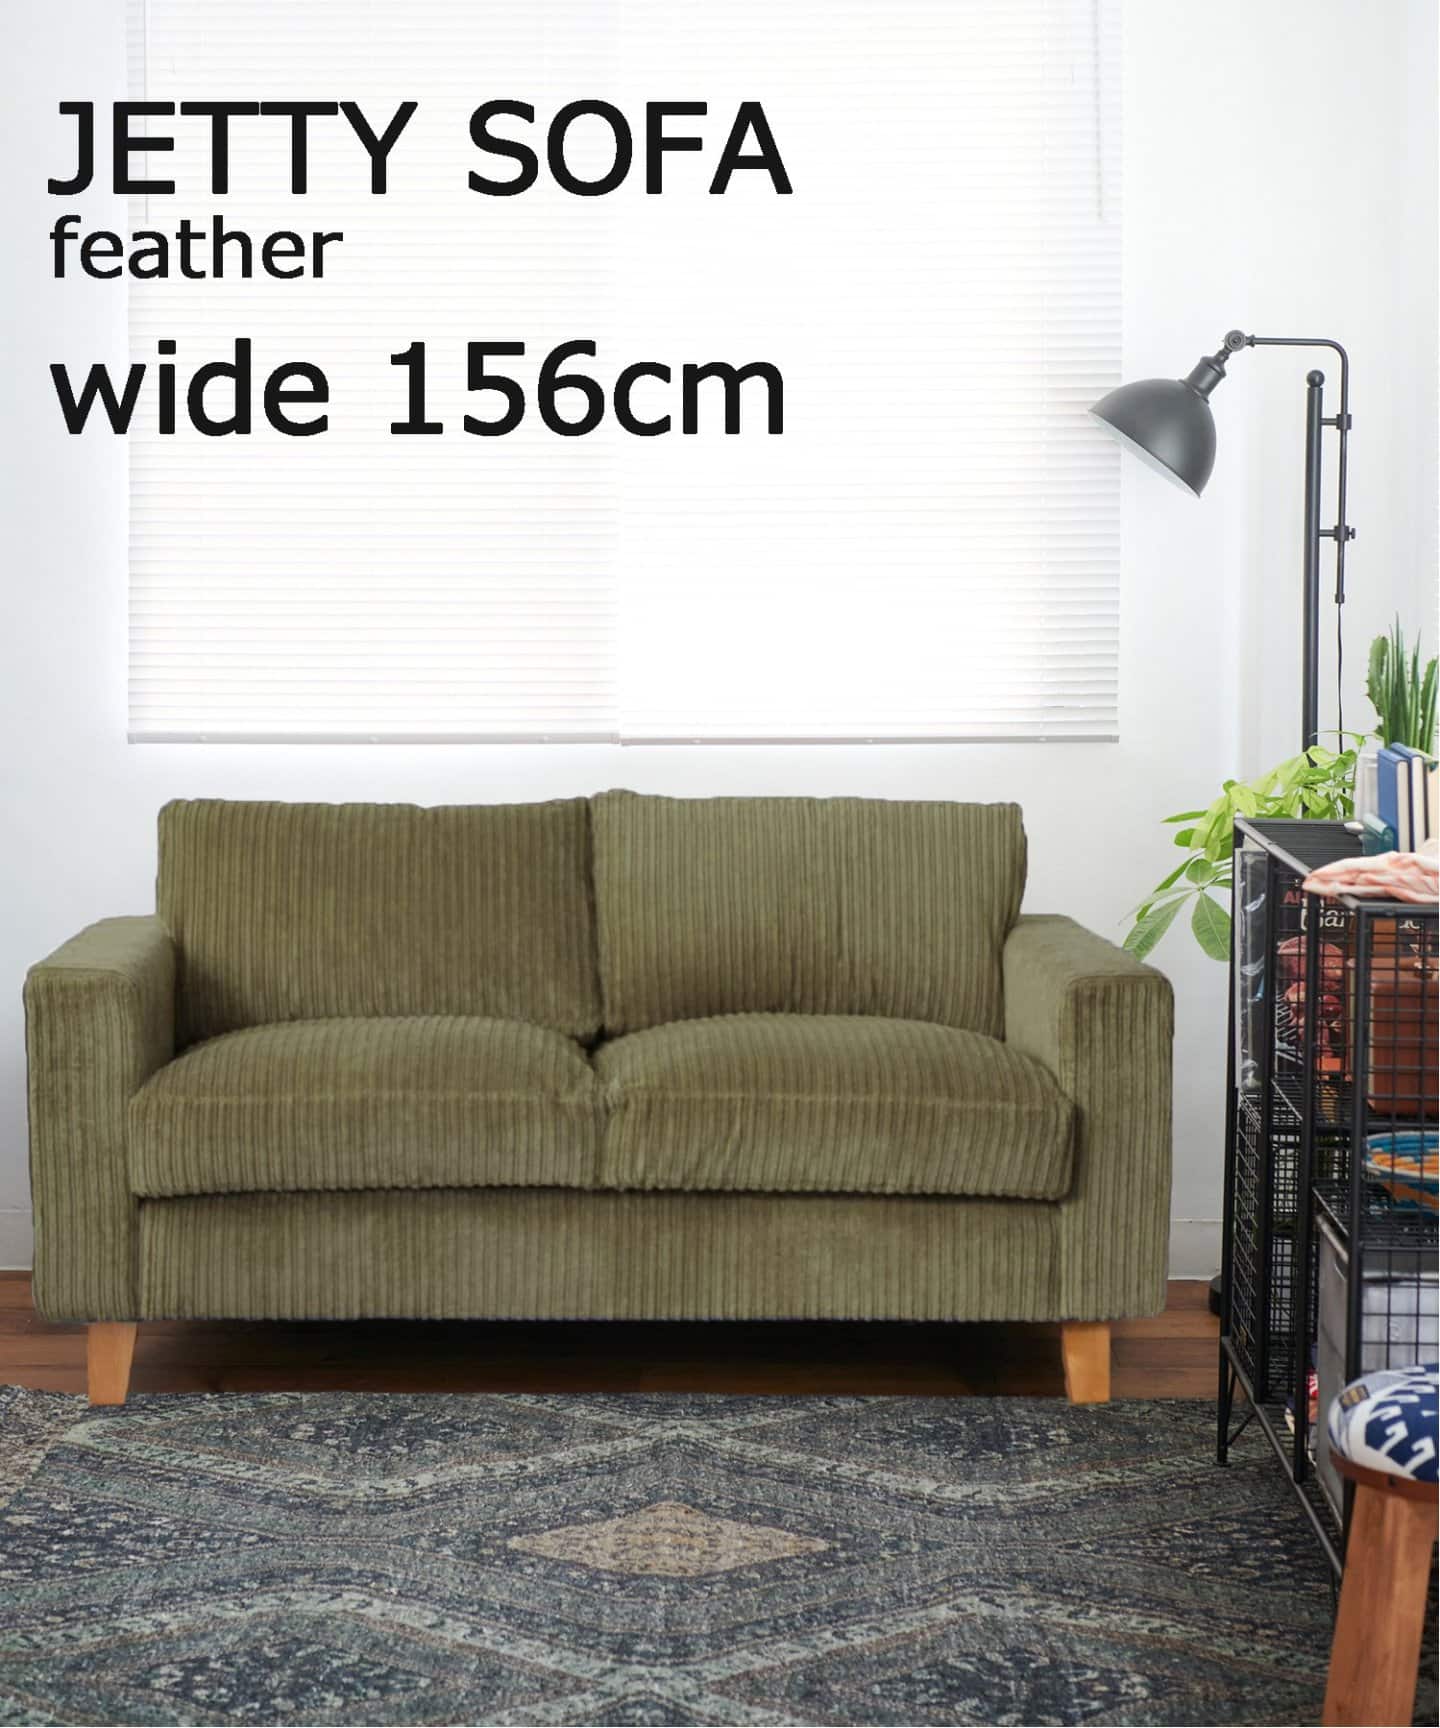 《ORDER》JETTY feather SOFA 2P W156 AC-07 KH ジェティー フェザーソファ カーキ 家具